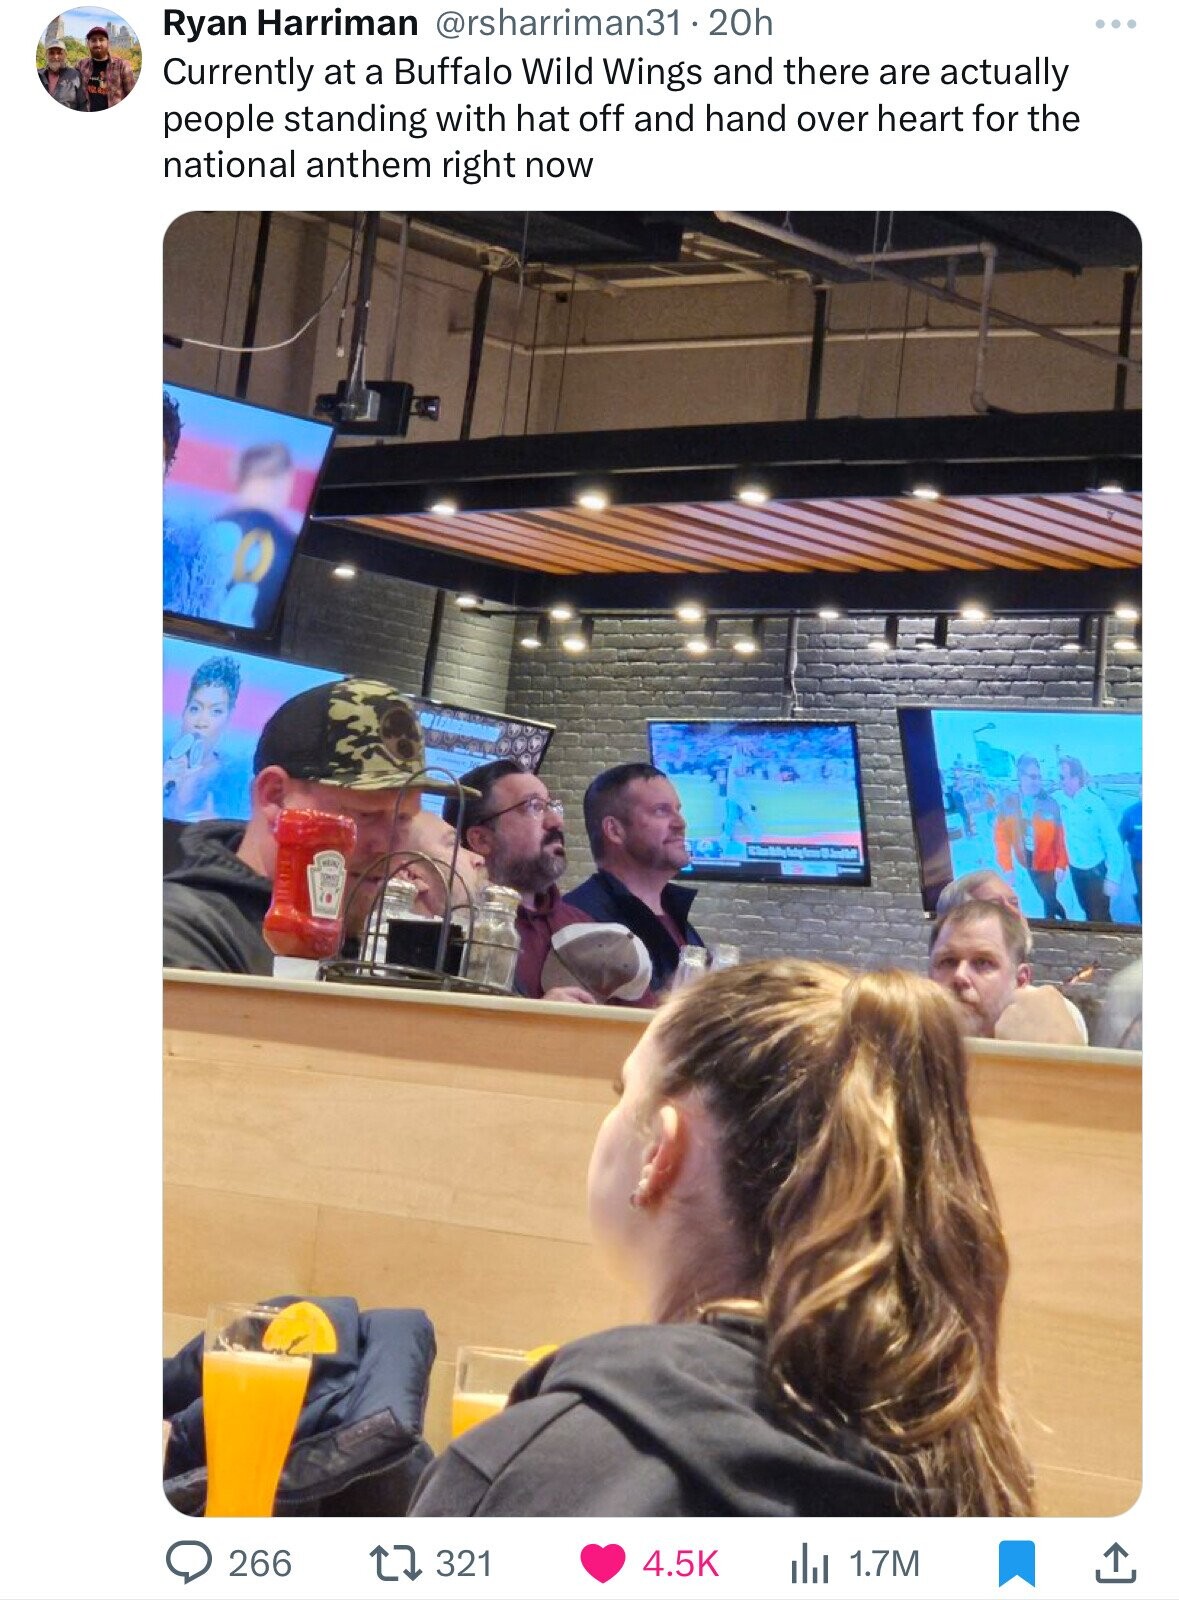 fun - Ryan Harriman 20h Currently at a Buffalo Wild Wings and there are actually people standing with hat off and hand over heart for the national anthem right now 266 Et 1321 1.7M ...